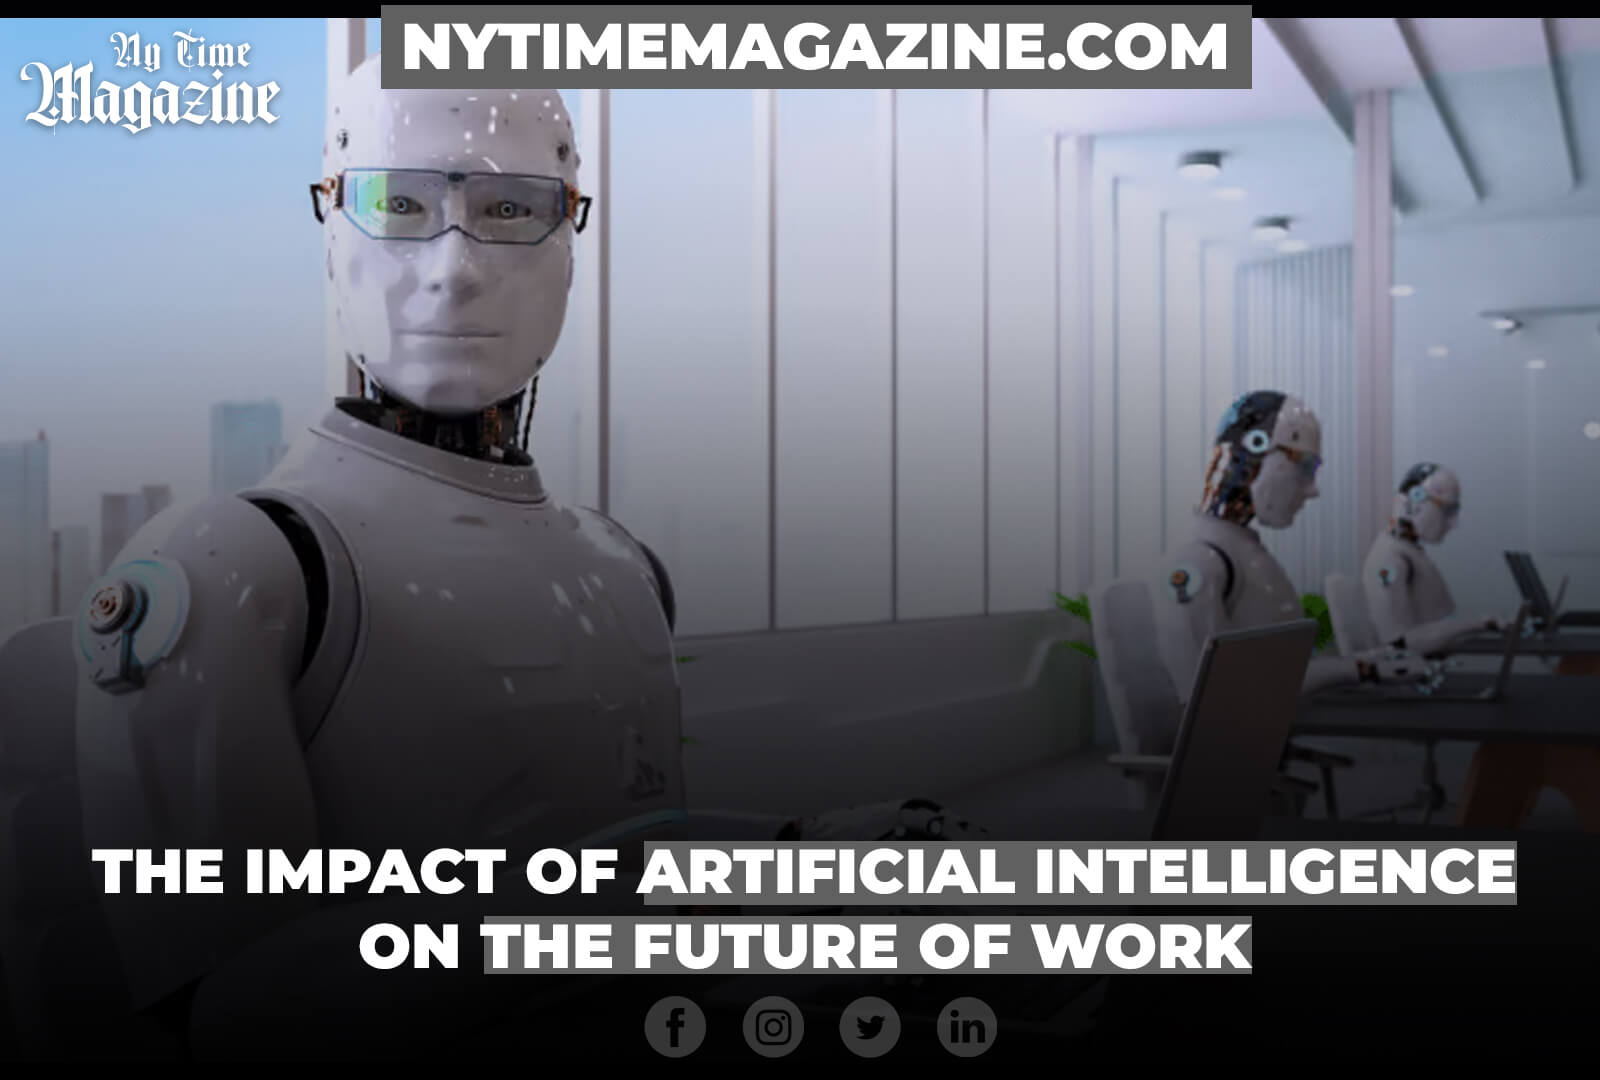 The impact of artificial intelligence on the future of work